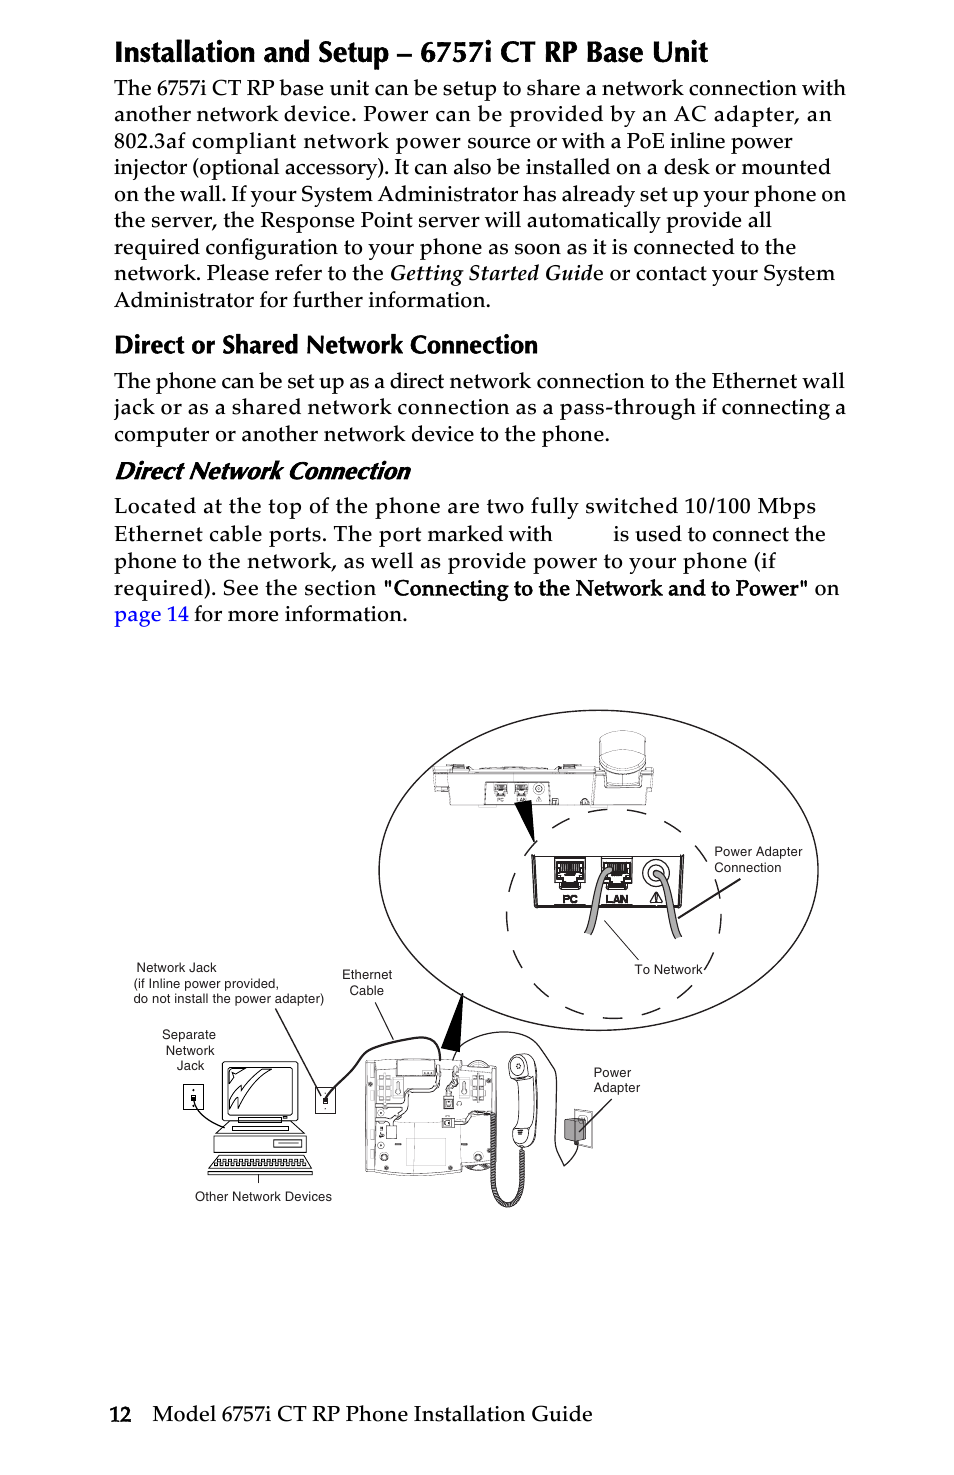 Installation and setup – 6757i ct rp base unit, Direct or shared network connection, Direct network connection | AASTRA 6757i CT RP User Manual | Page 18 / 48